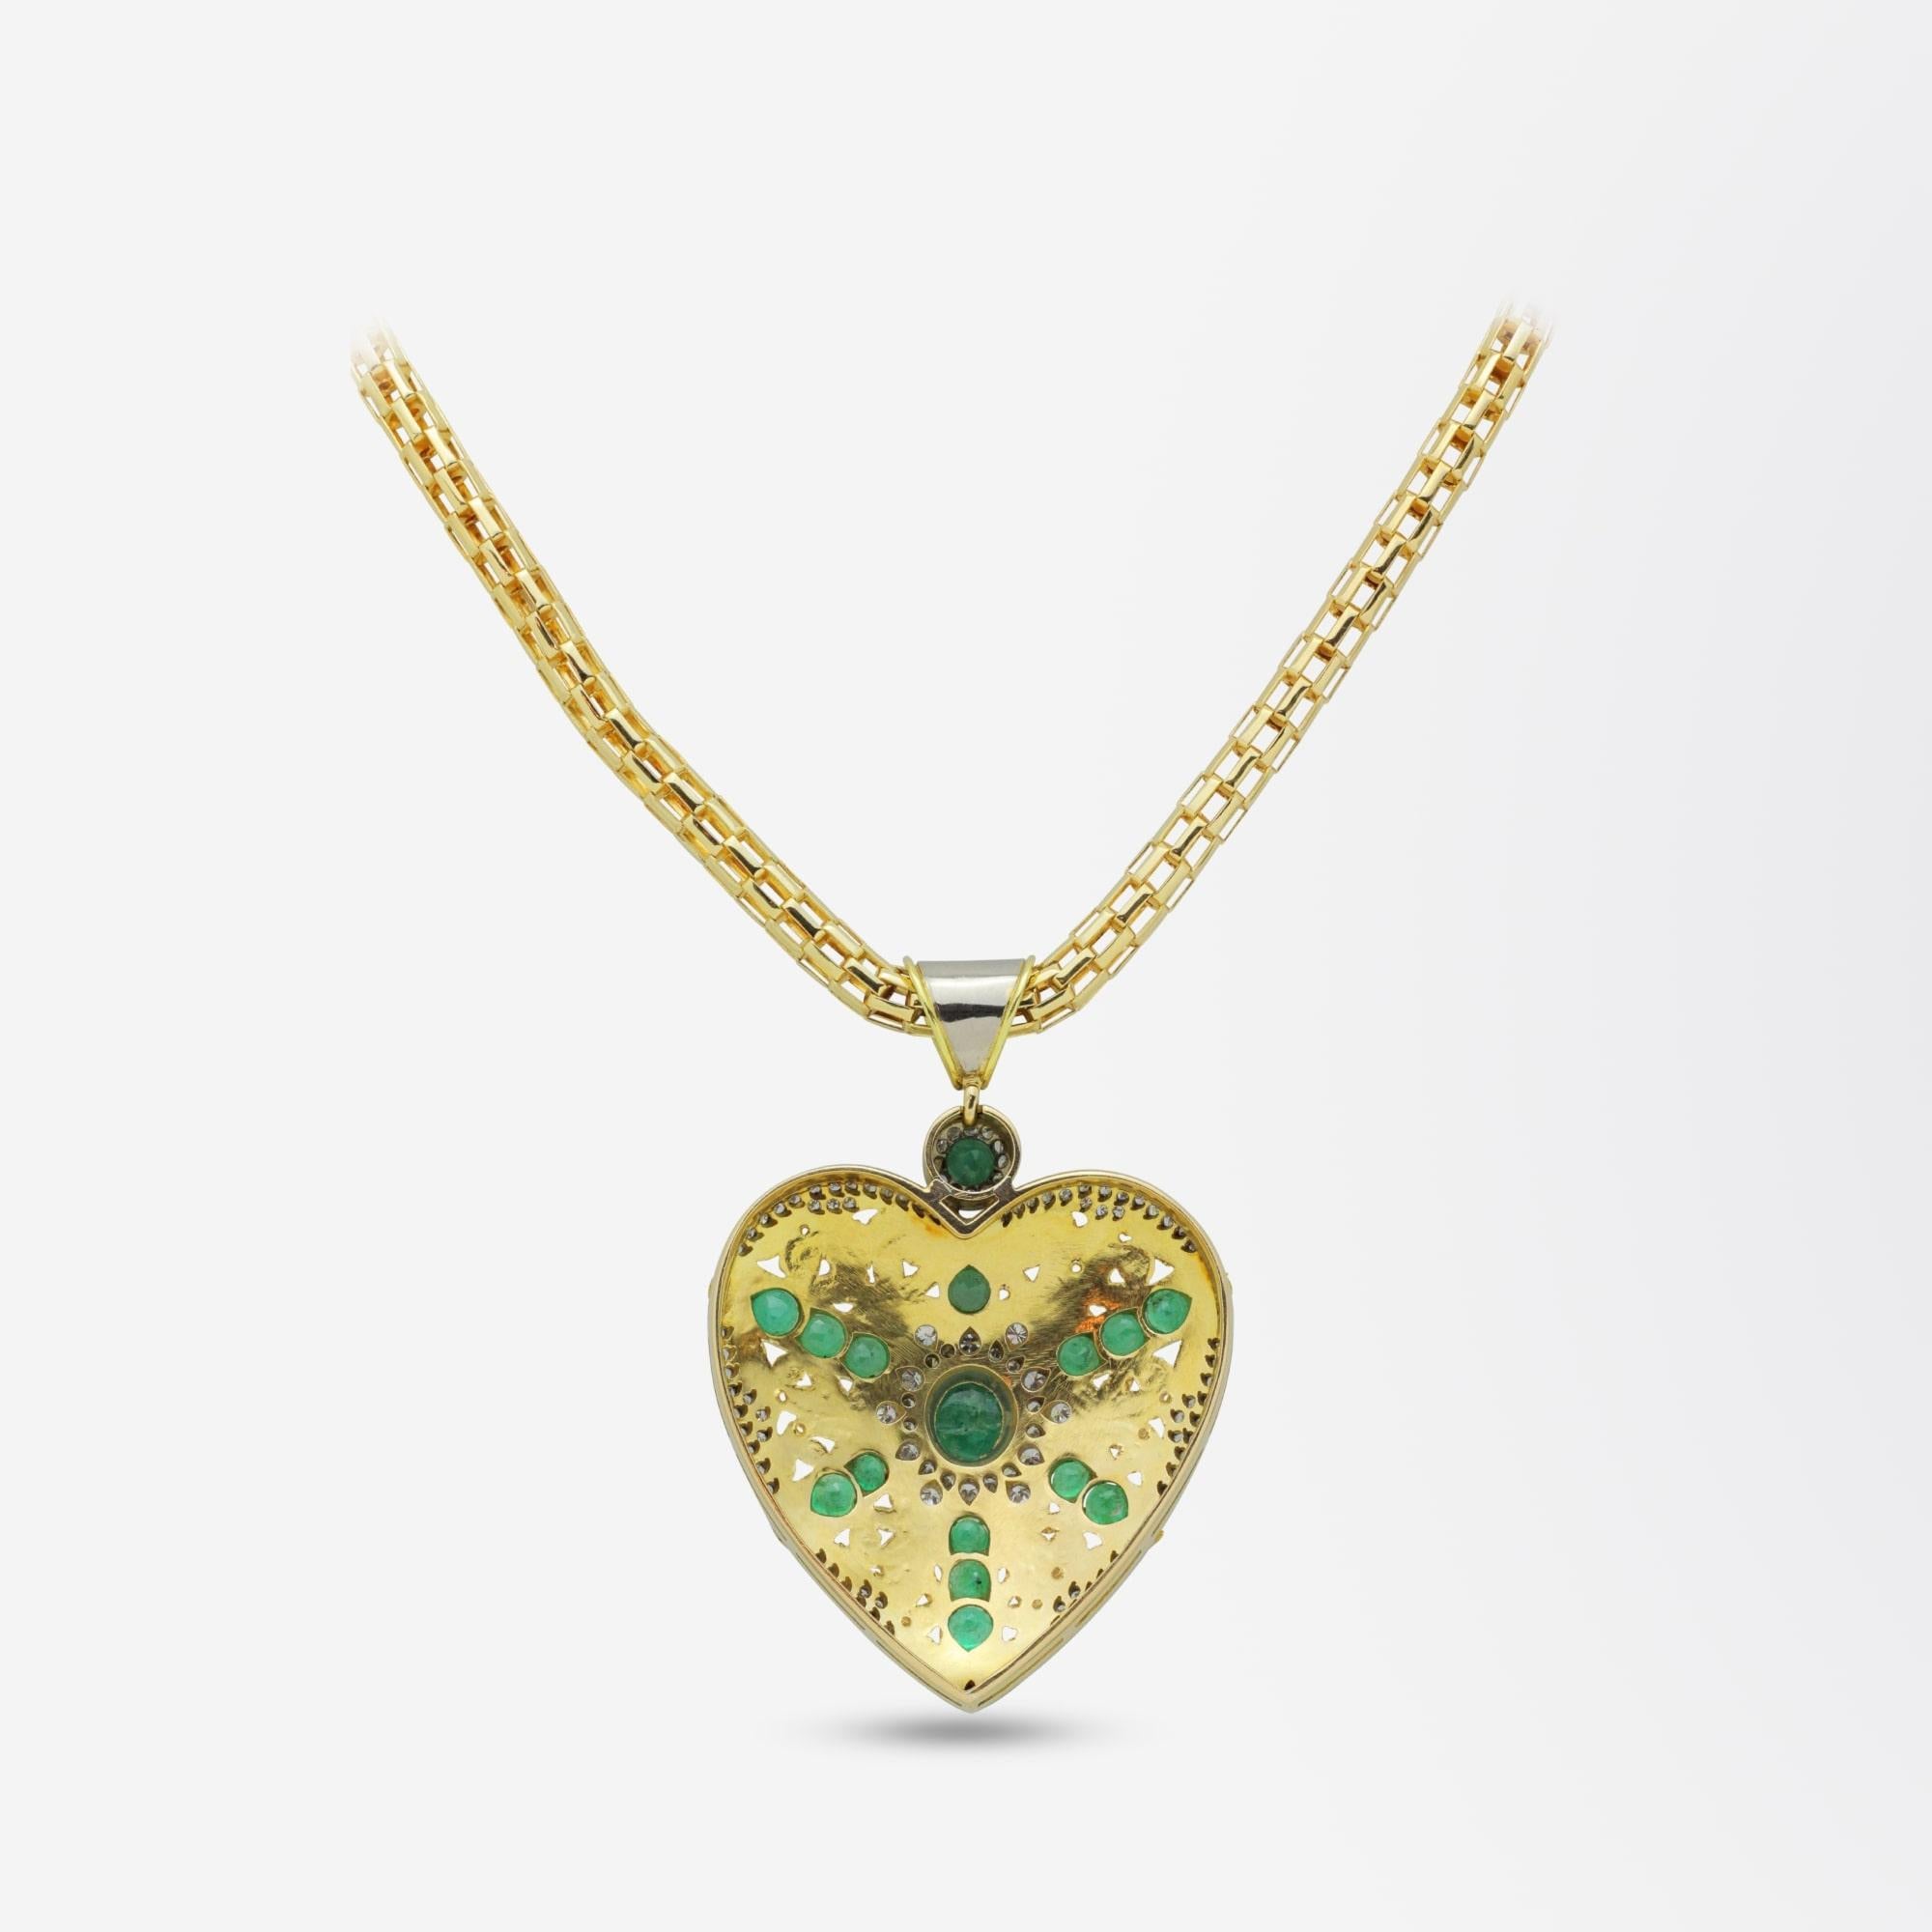 A bold two tone gold necklace with a large emerald and diamond heart pendant. This unusual pendant is handcrafted with textured acanthus type scrolls. The piece centres on a cabochon emerald that is surrounded by a double 'star' halo that has been